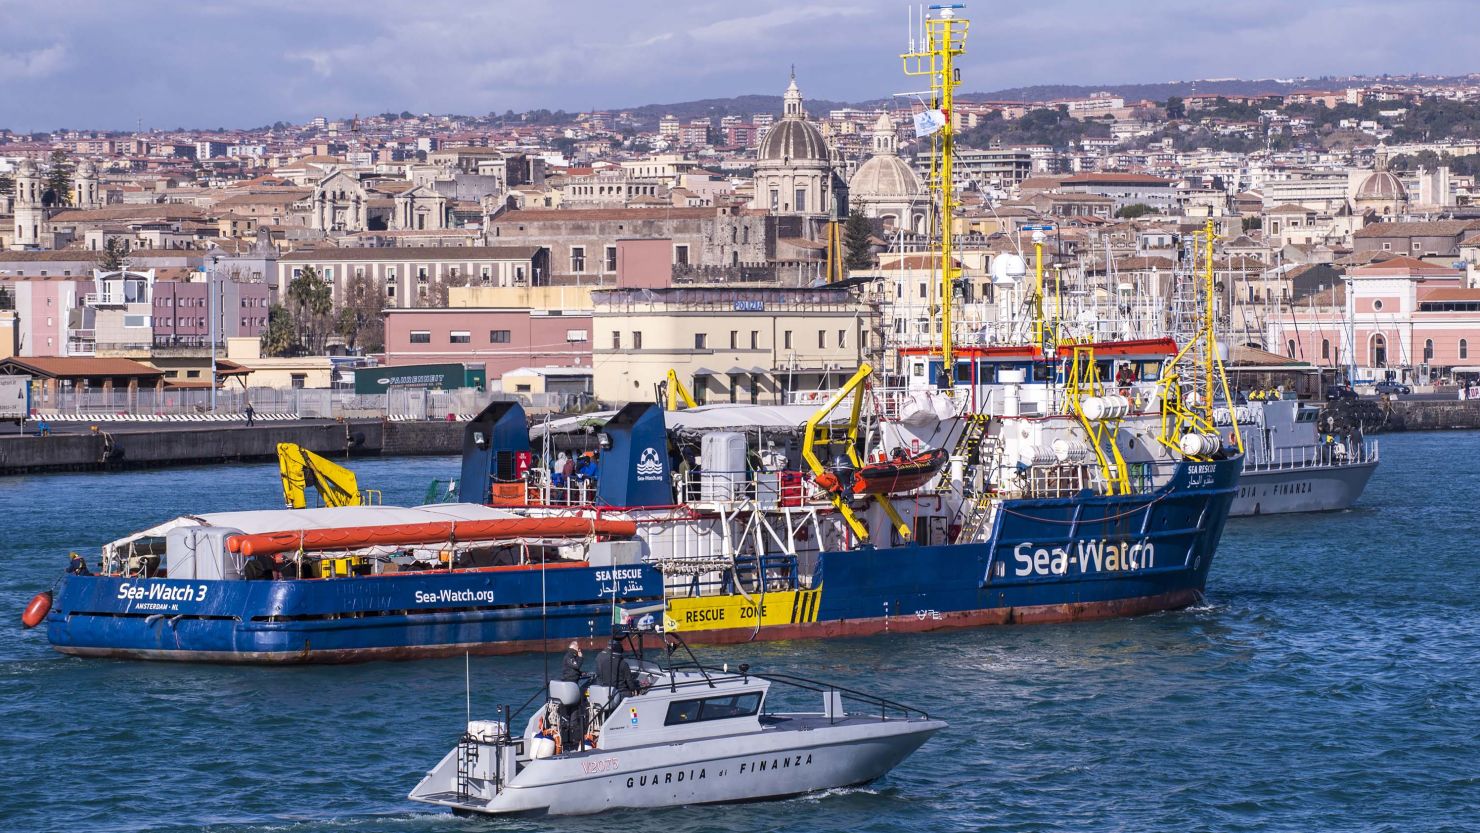 Sea-Watch 3 rescue vessel was allowed to disembark 47 migrants in Catania, Italy, on Thursday after a political impasse left them stranded off the coast of Sicily for nearly two weeks.